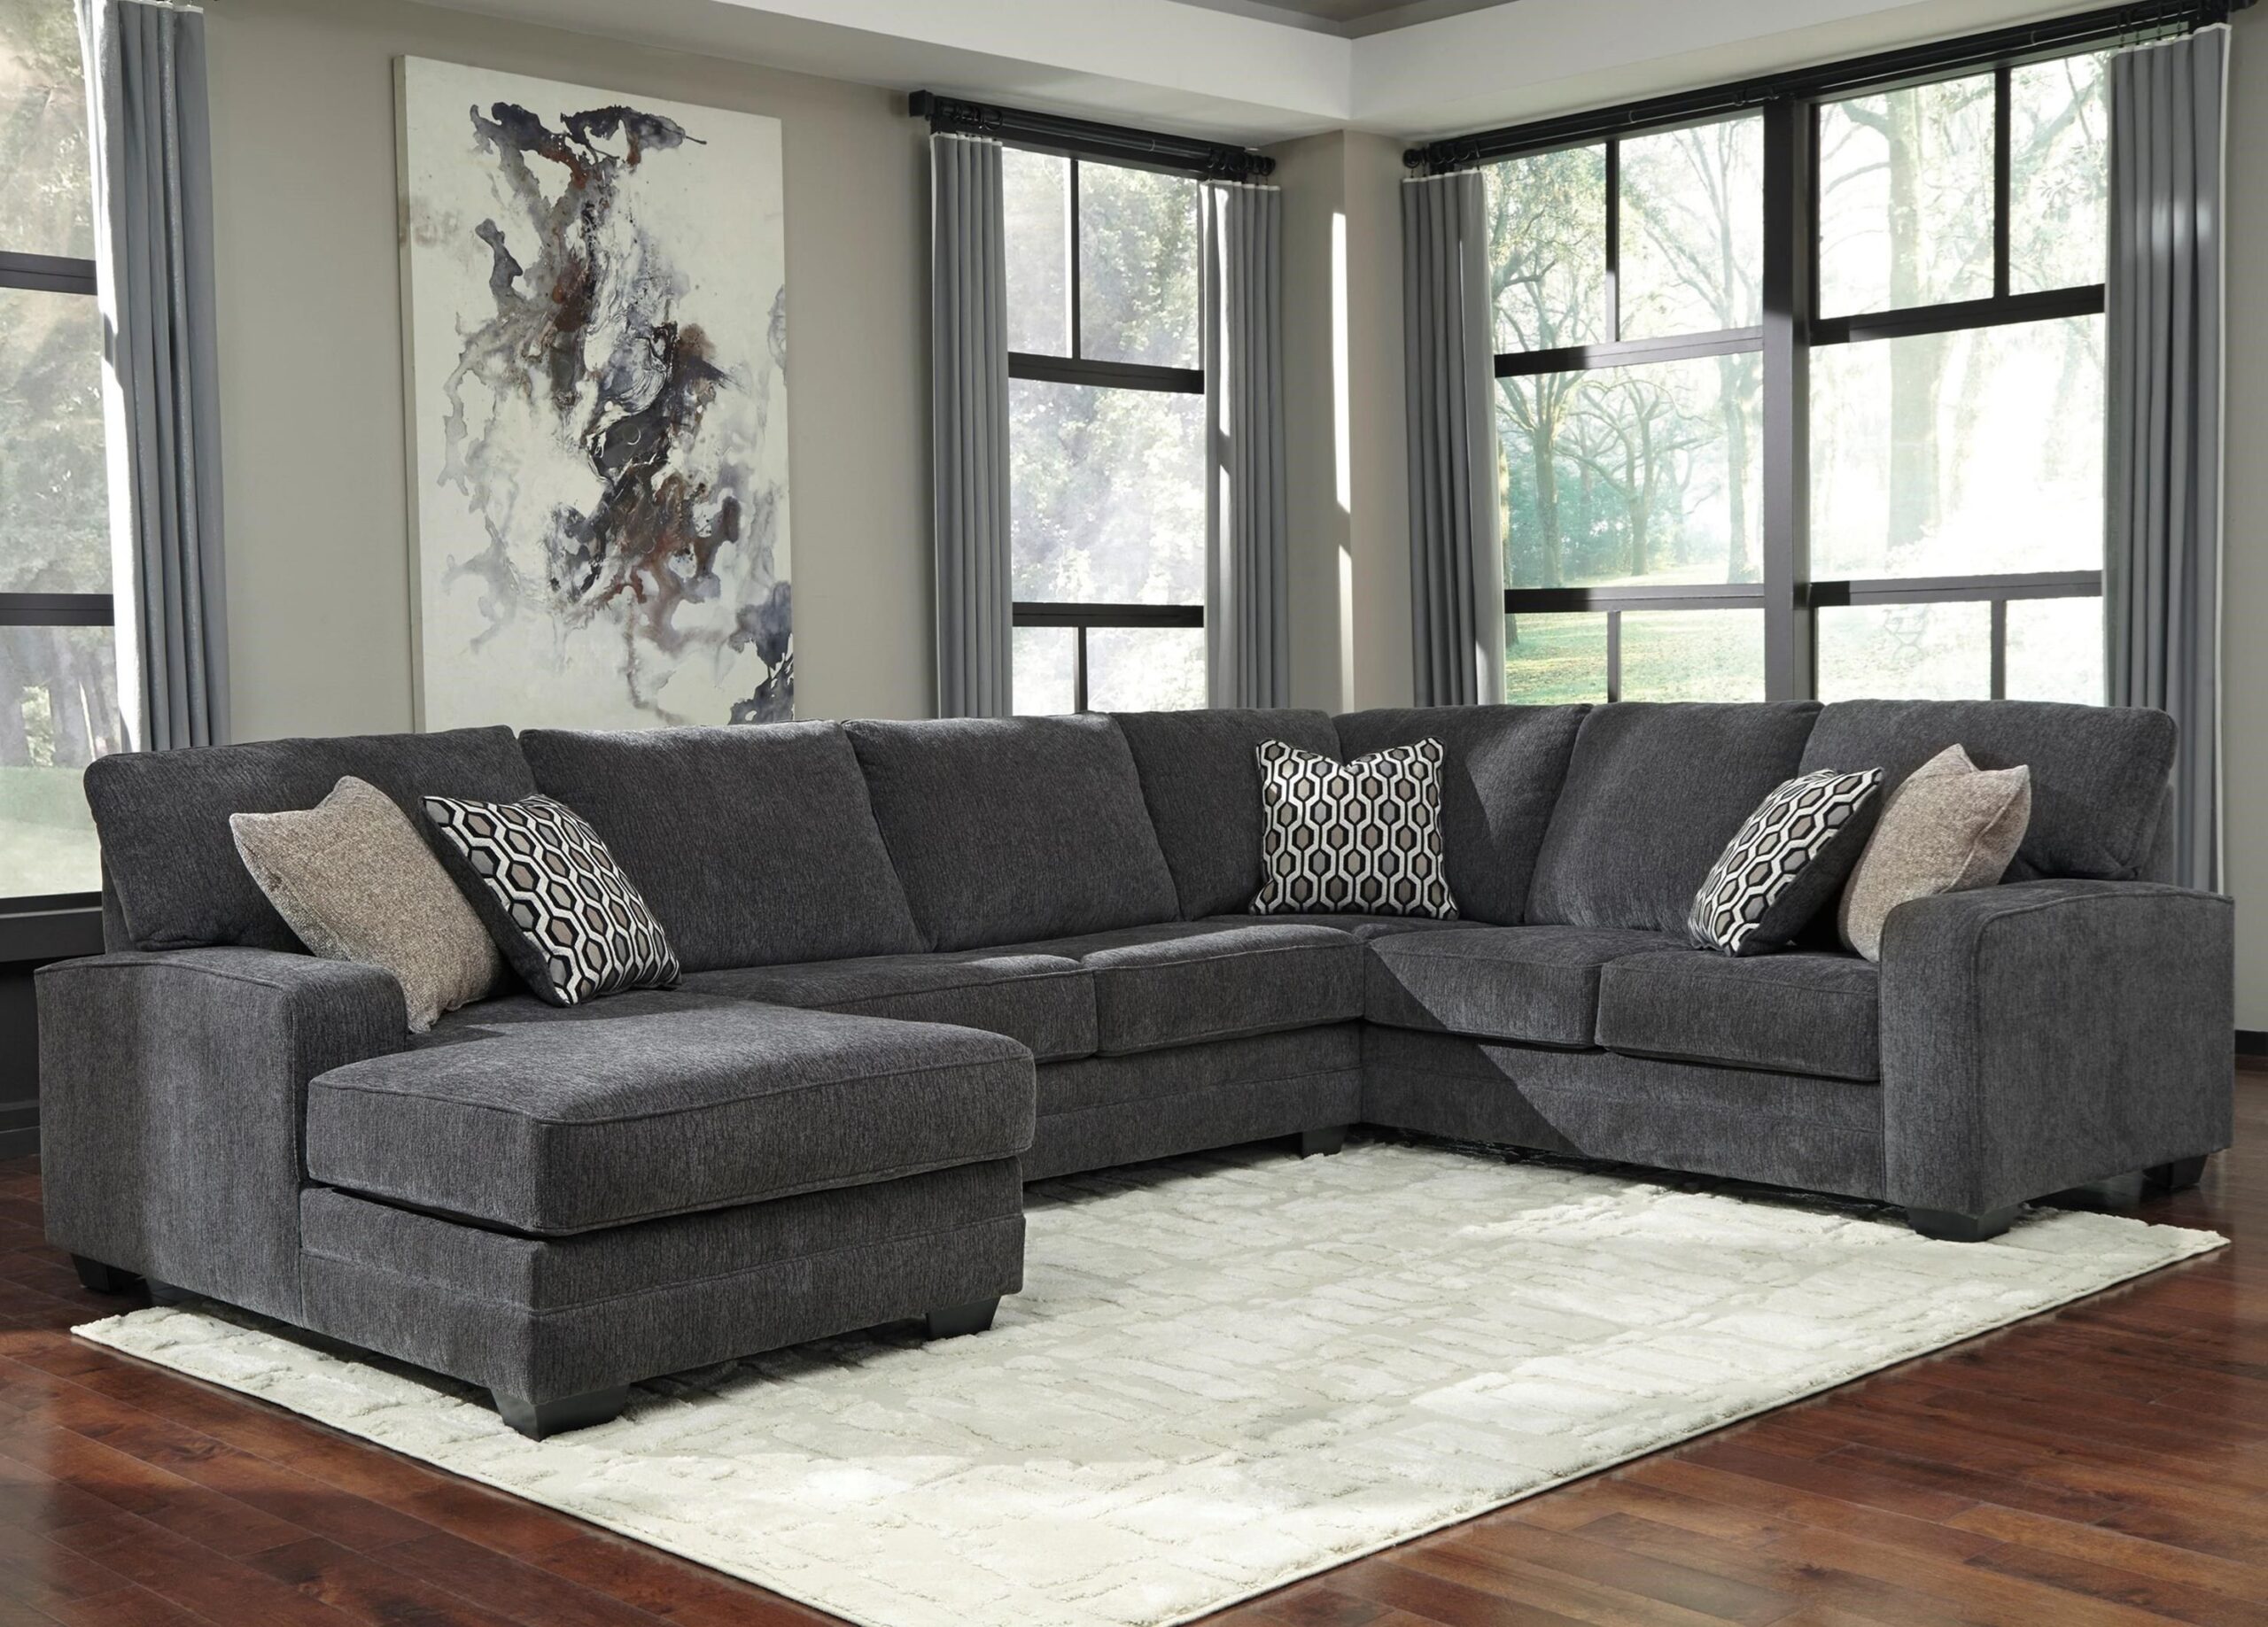 Choosing the Perfect Sam Levitz Sectional
Sofa for Your Living Room